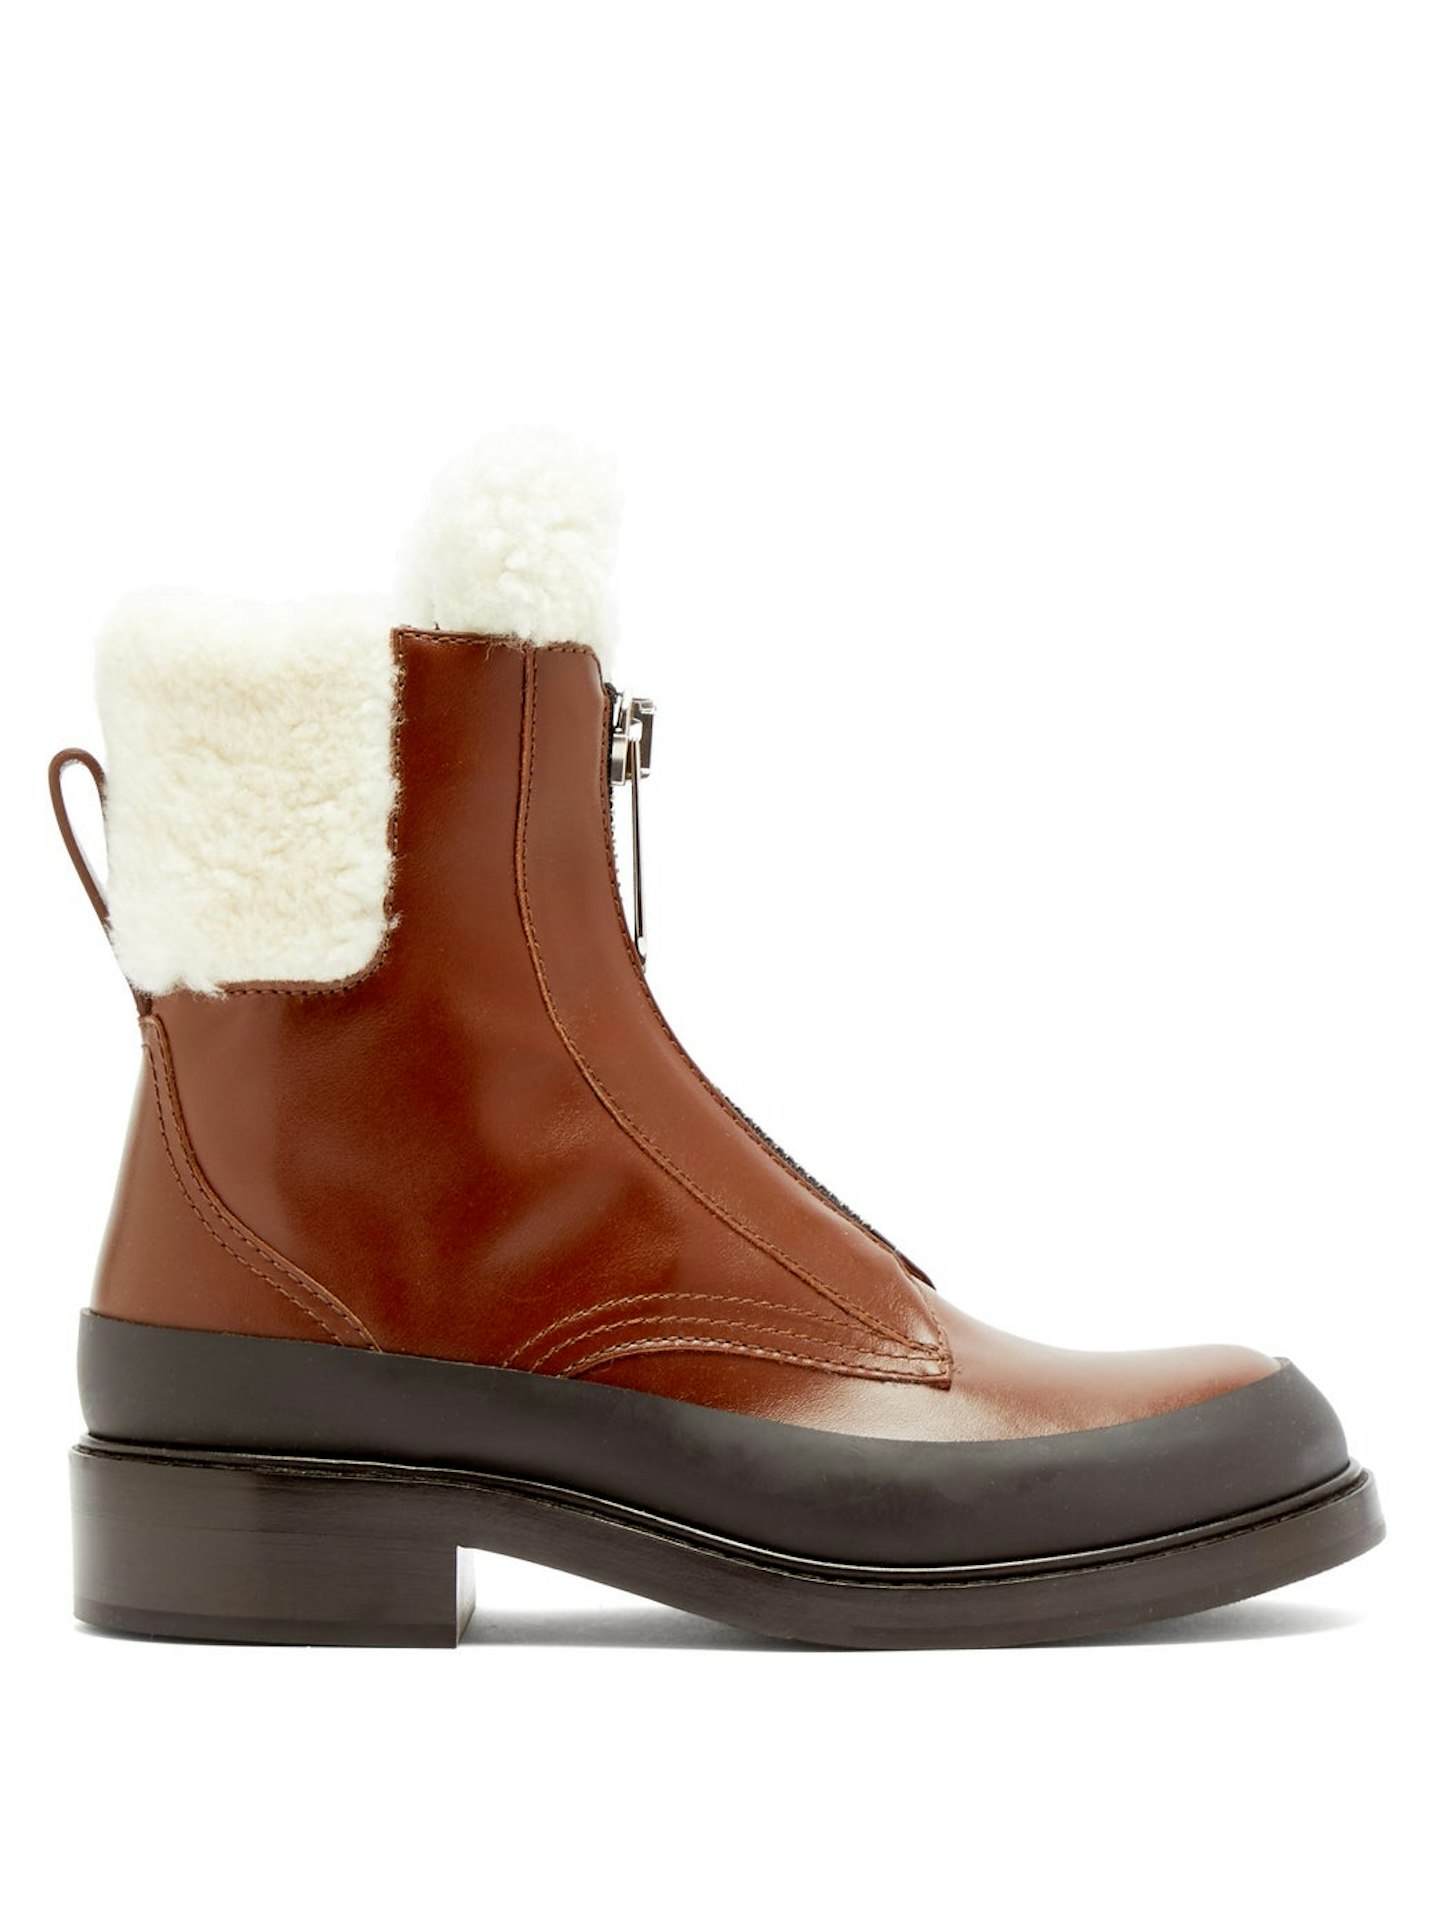 Chloe, Roy Shearling-lined Leather Boots, £885